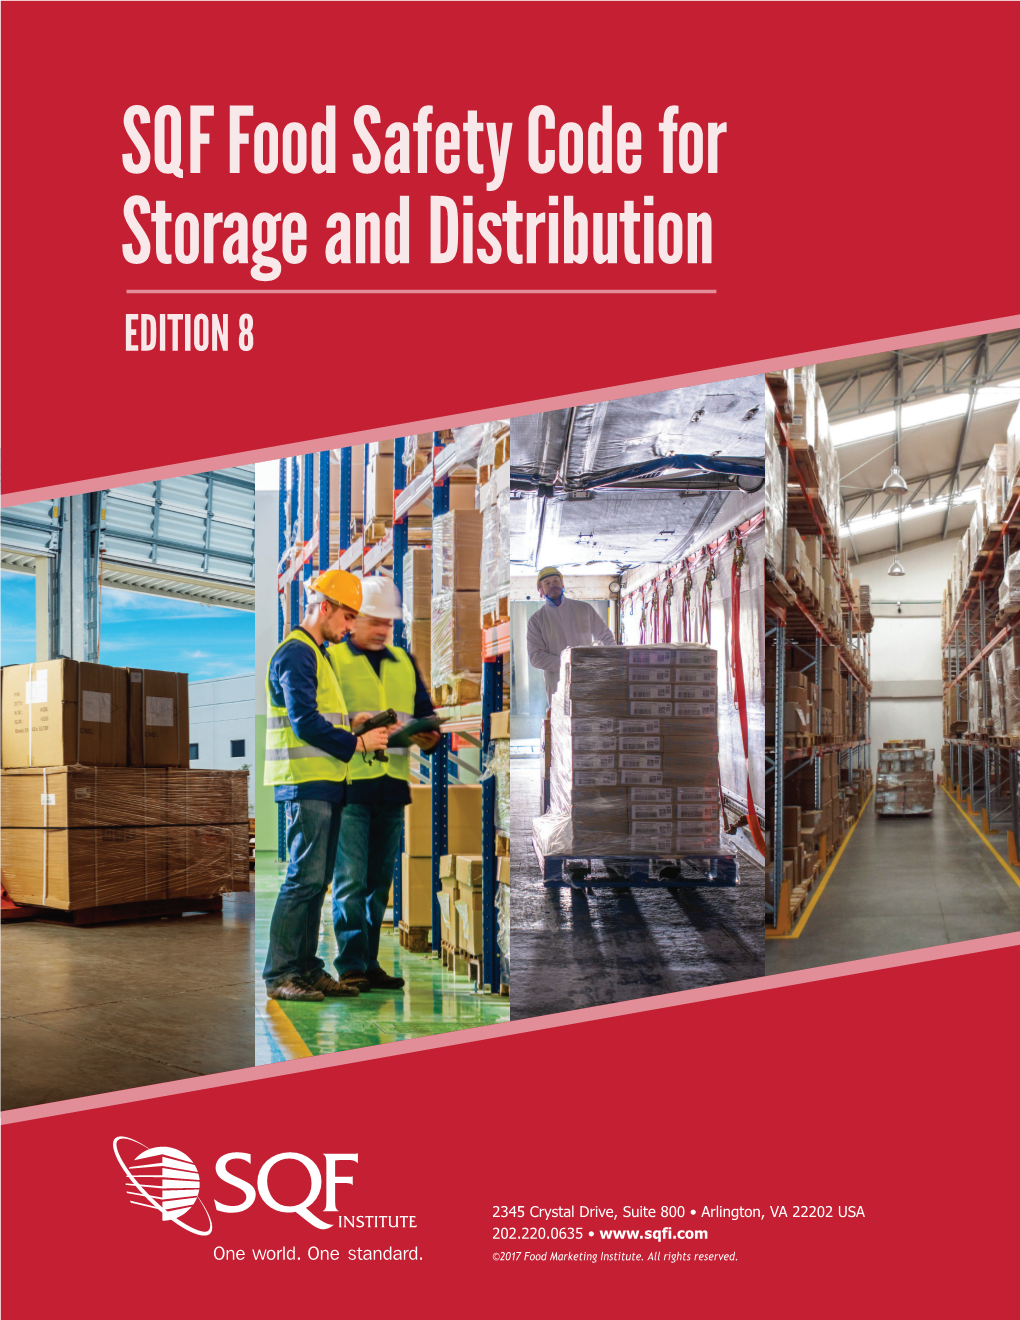 SQF Food Safety Code for Storage and Distribution EDITION 8